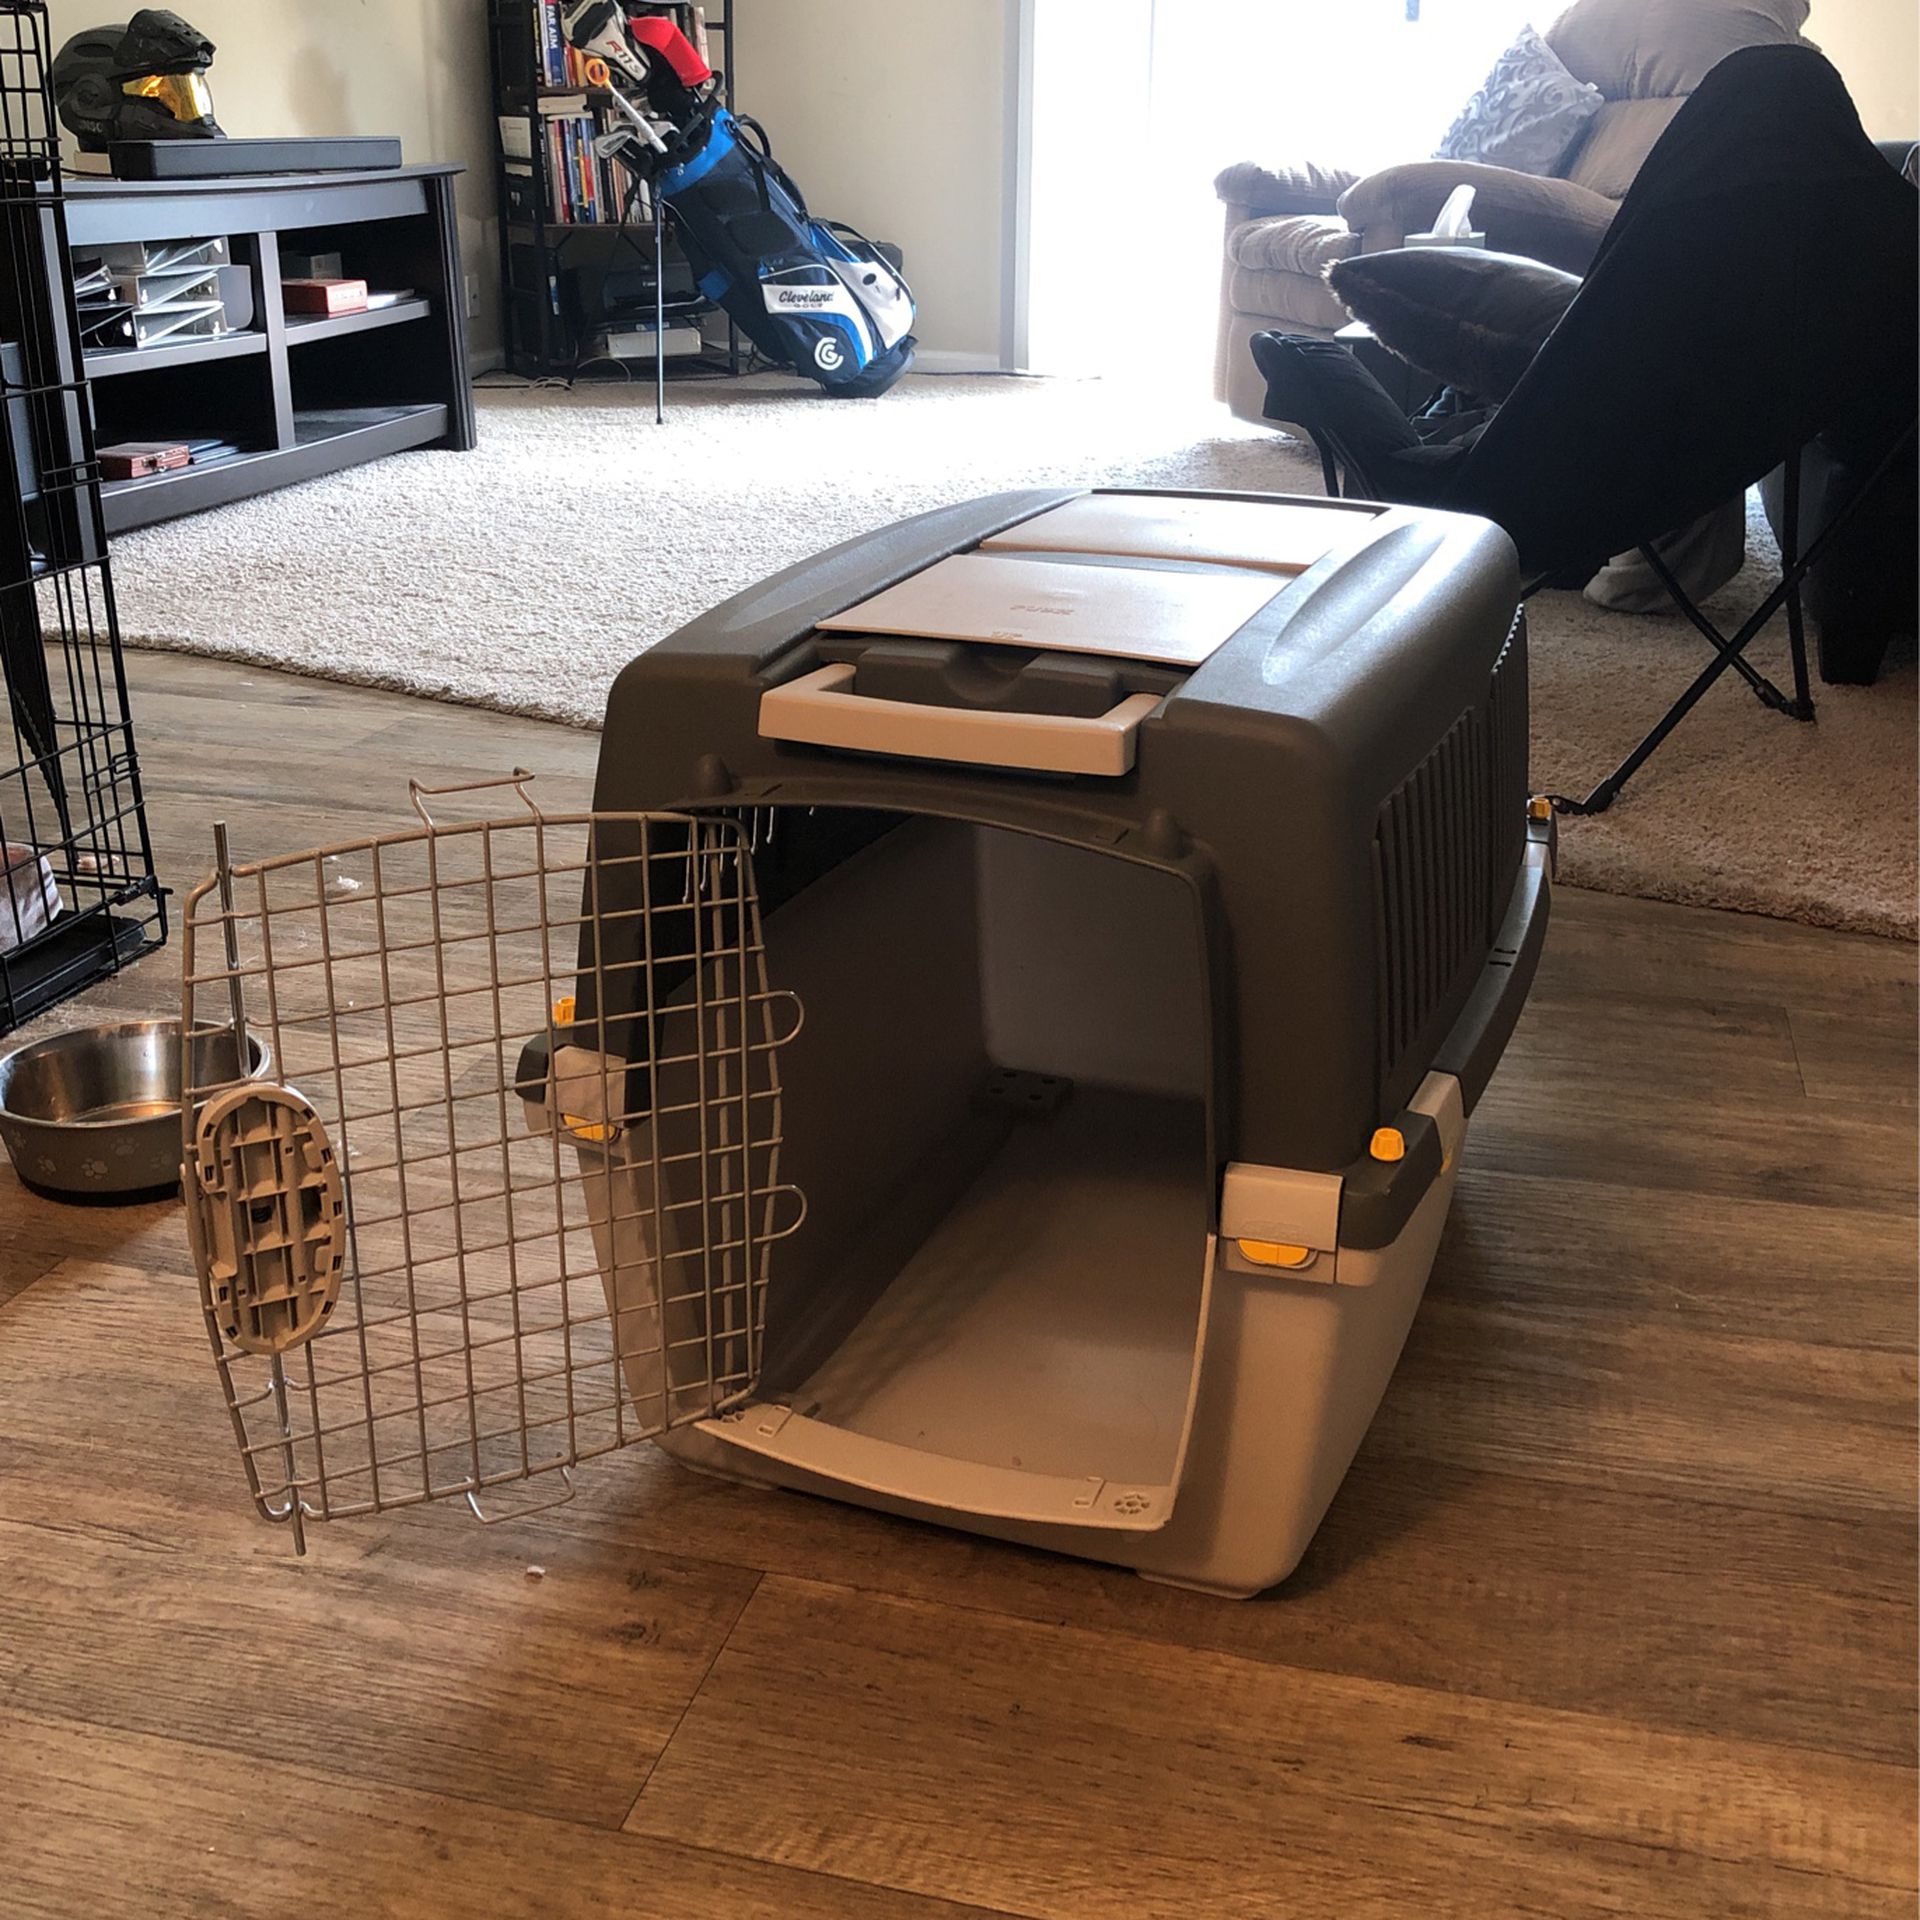 Large Puppy Travel Crate